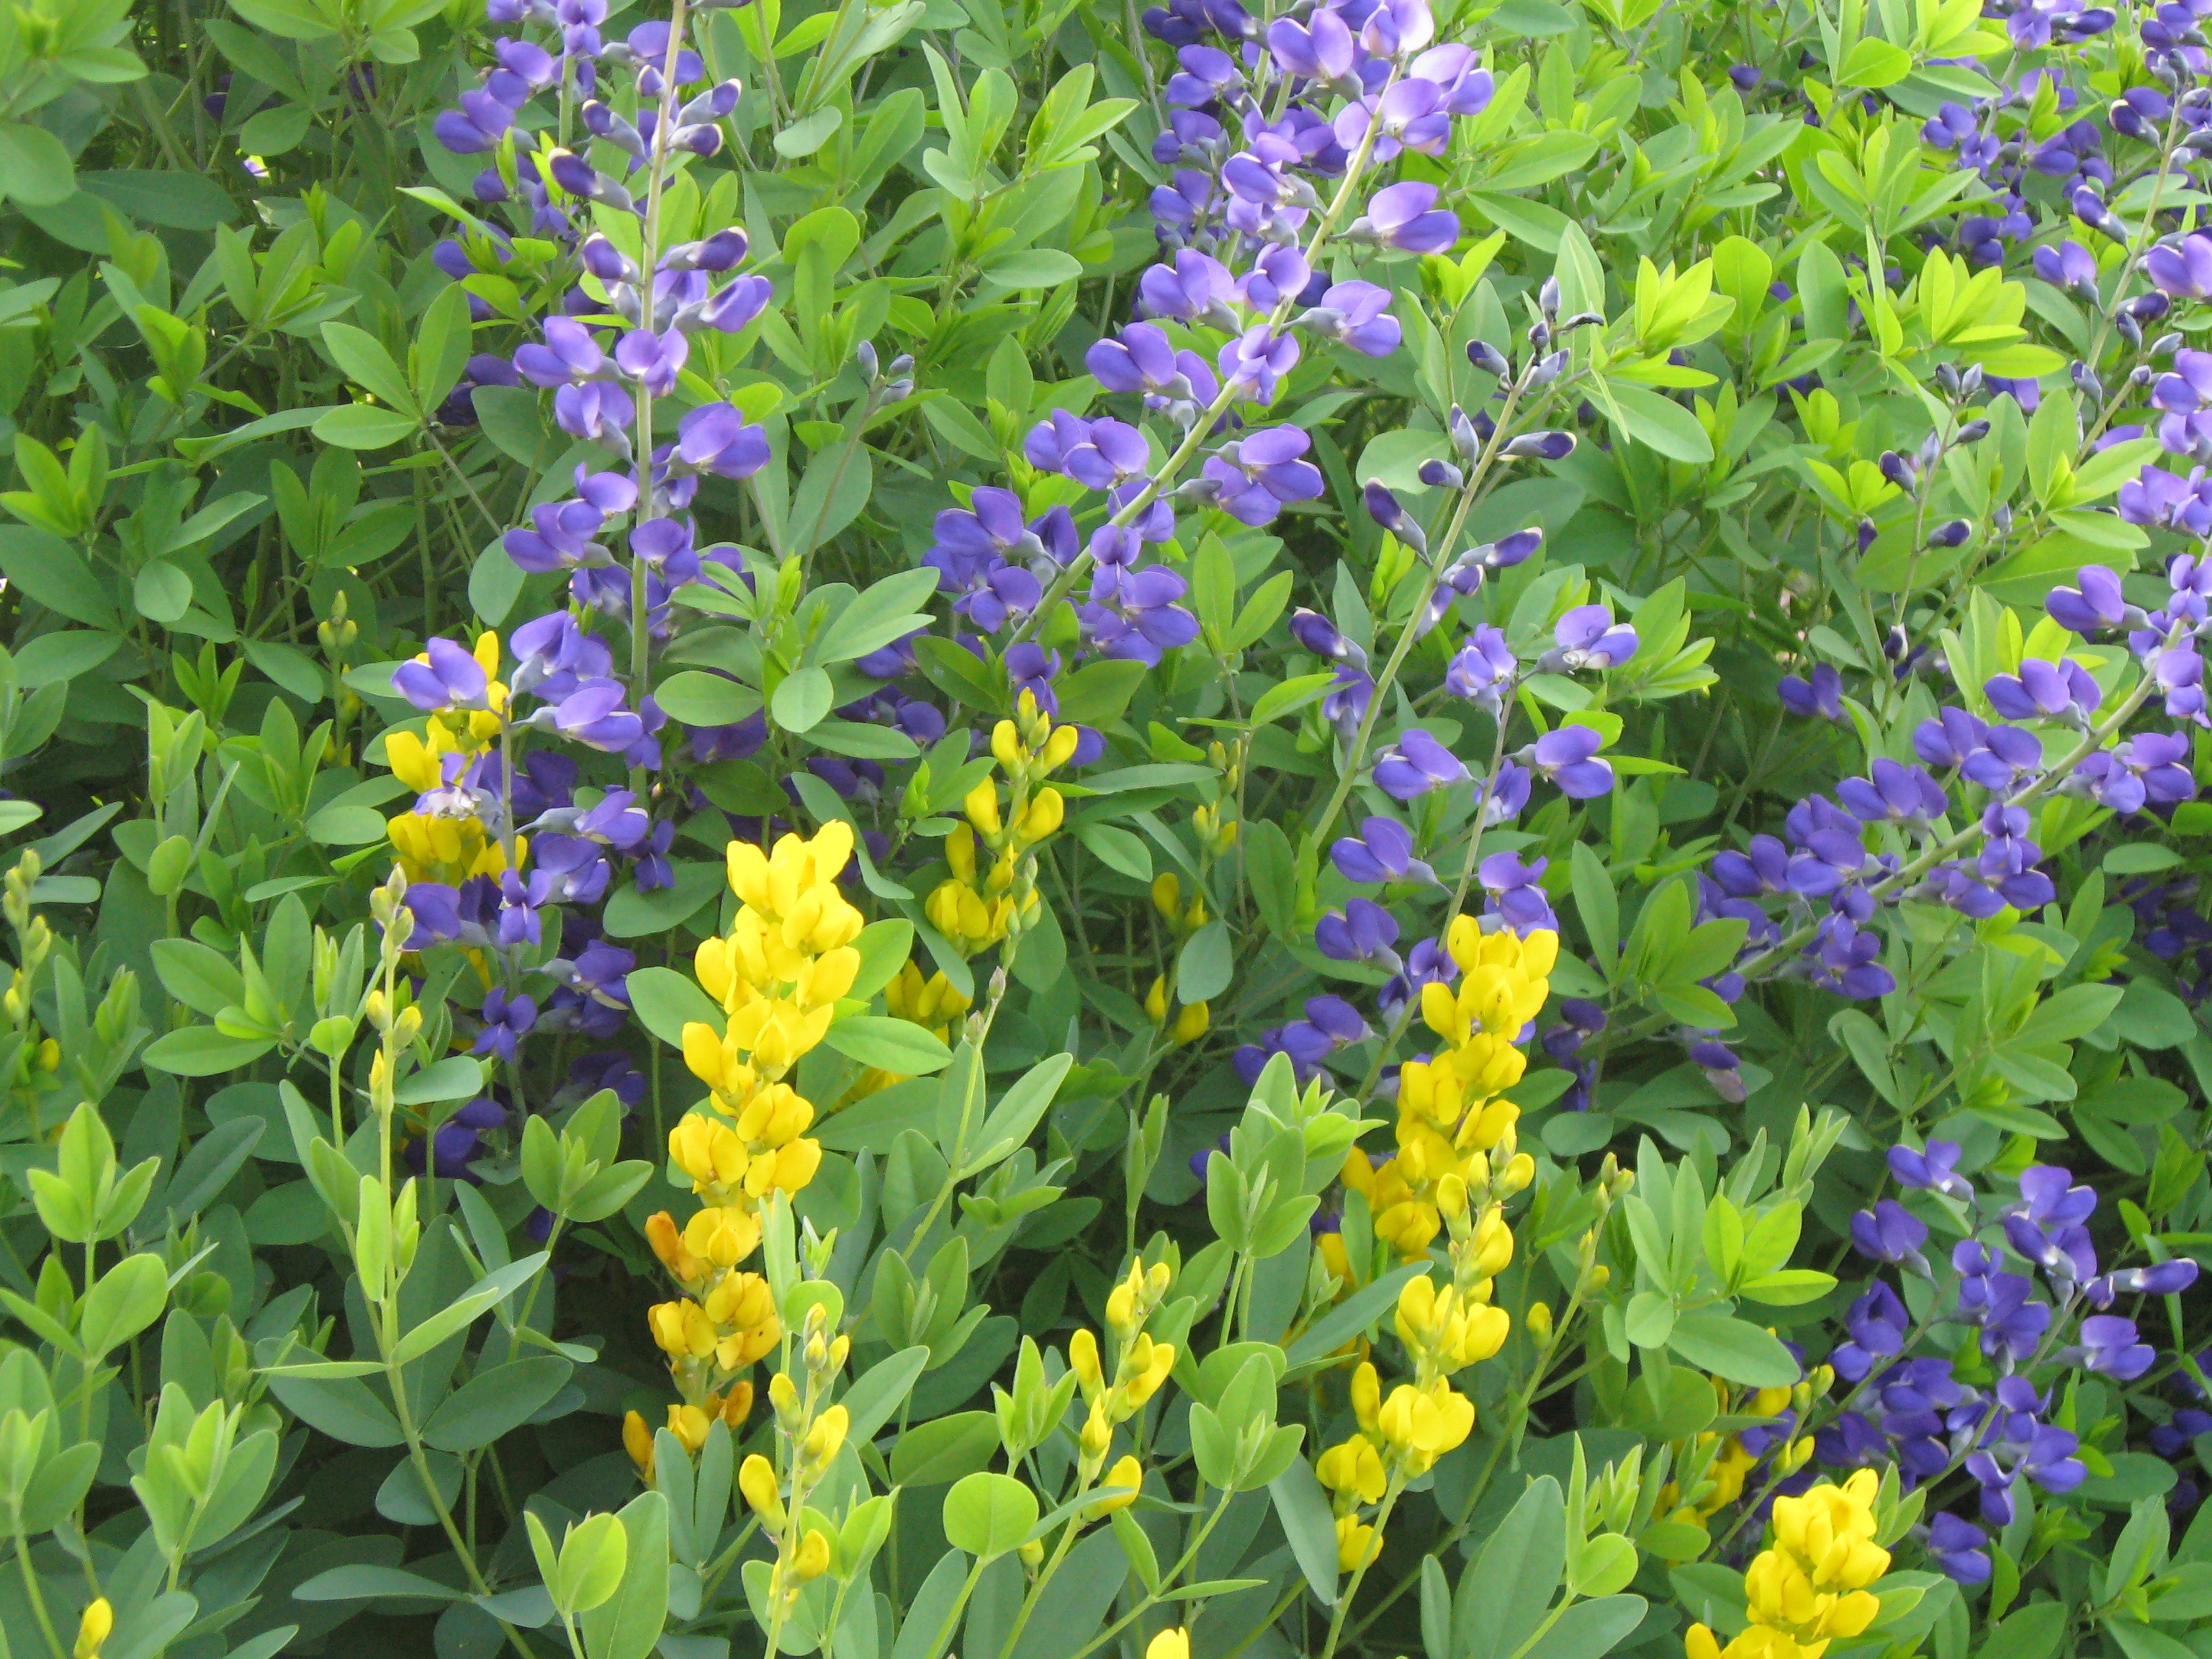 baptisia plant with green, cane-like braches with yellow and purple flowers